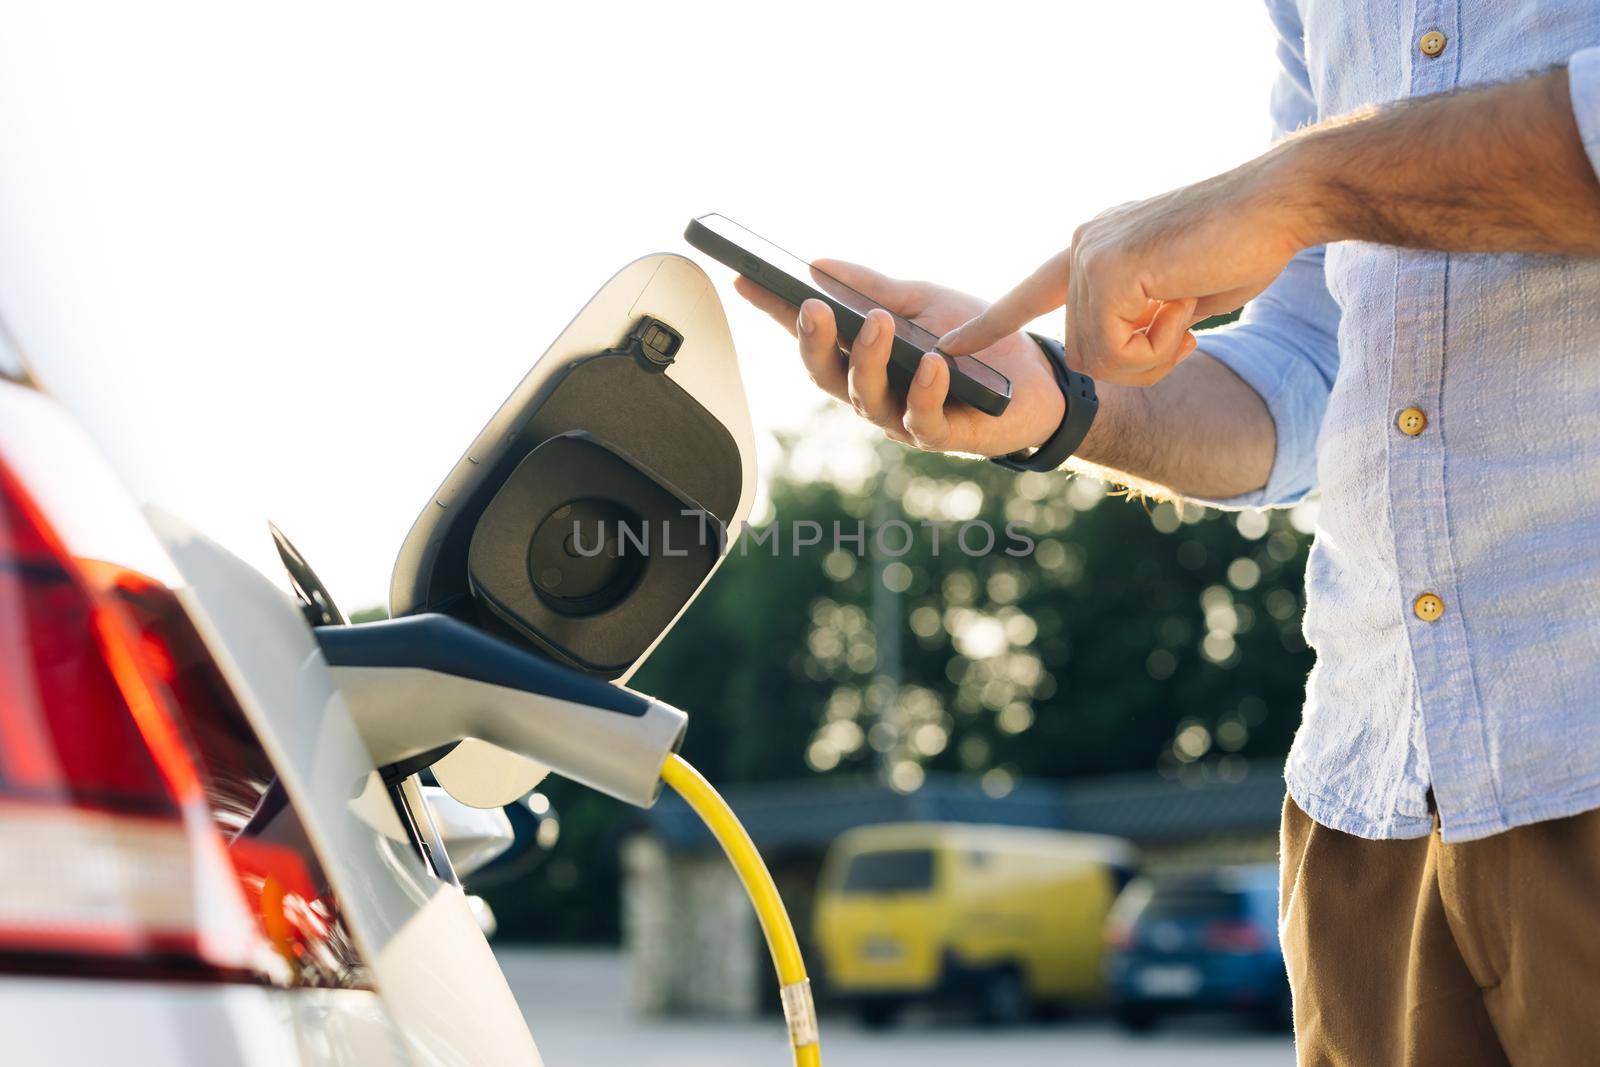 Male attaching in power cord to electric car using app on smartphone. Man plugging electric car from charging station. Businessman charging electric car on charging station at sunset